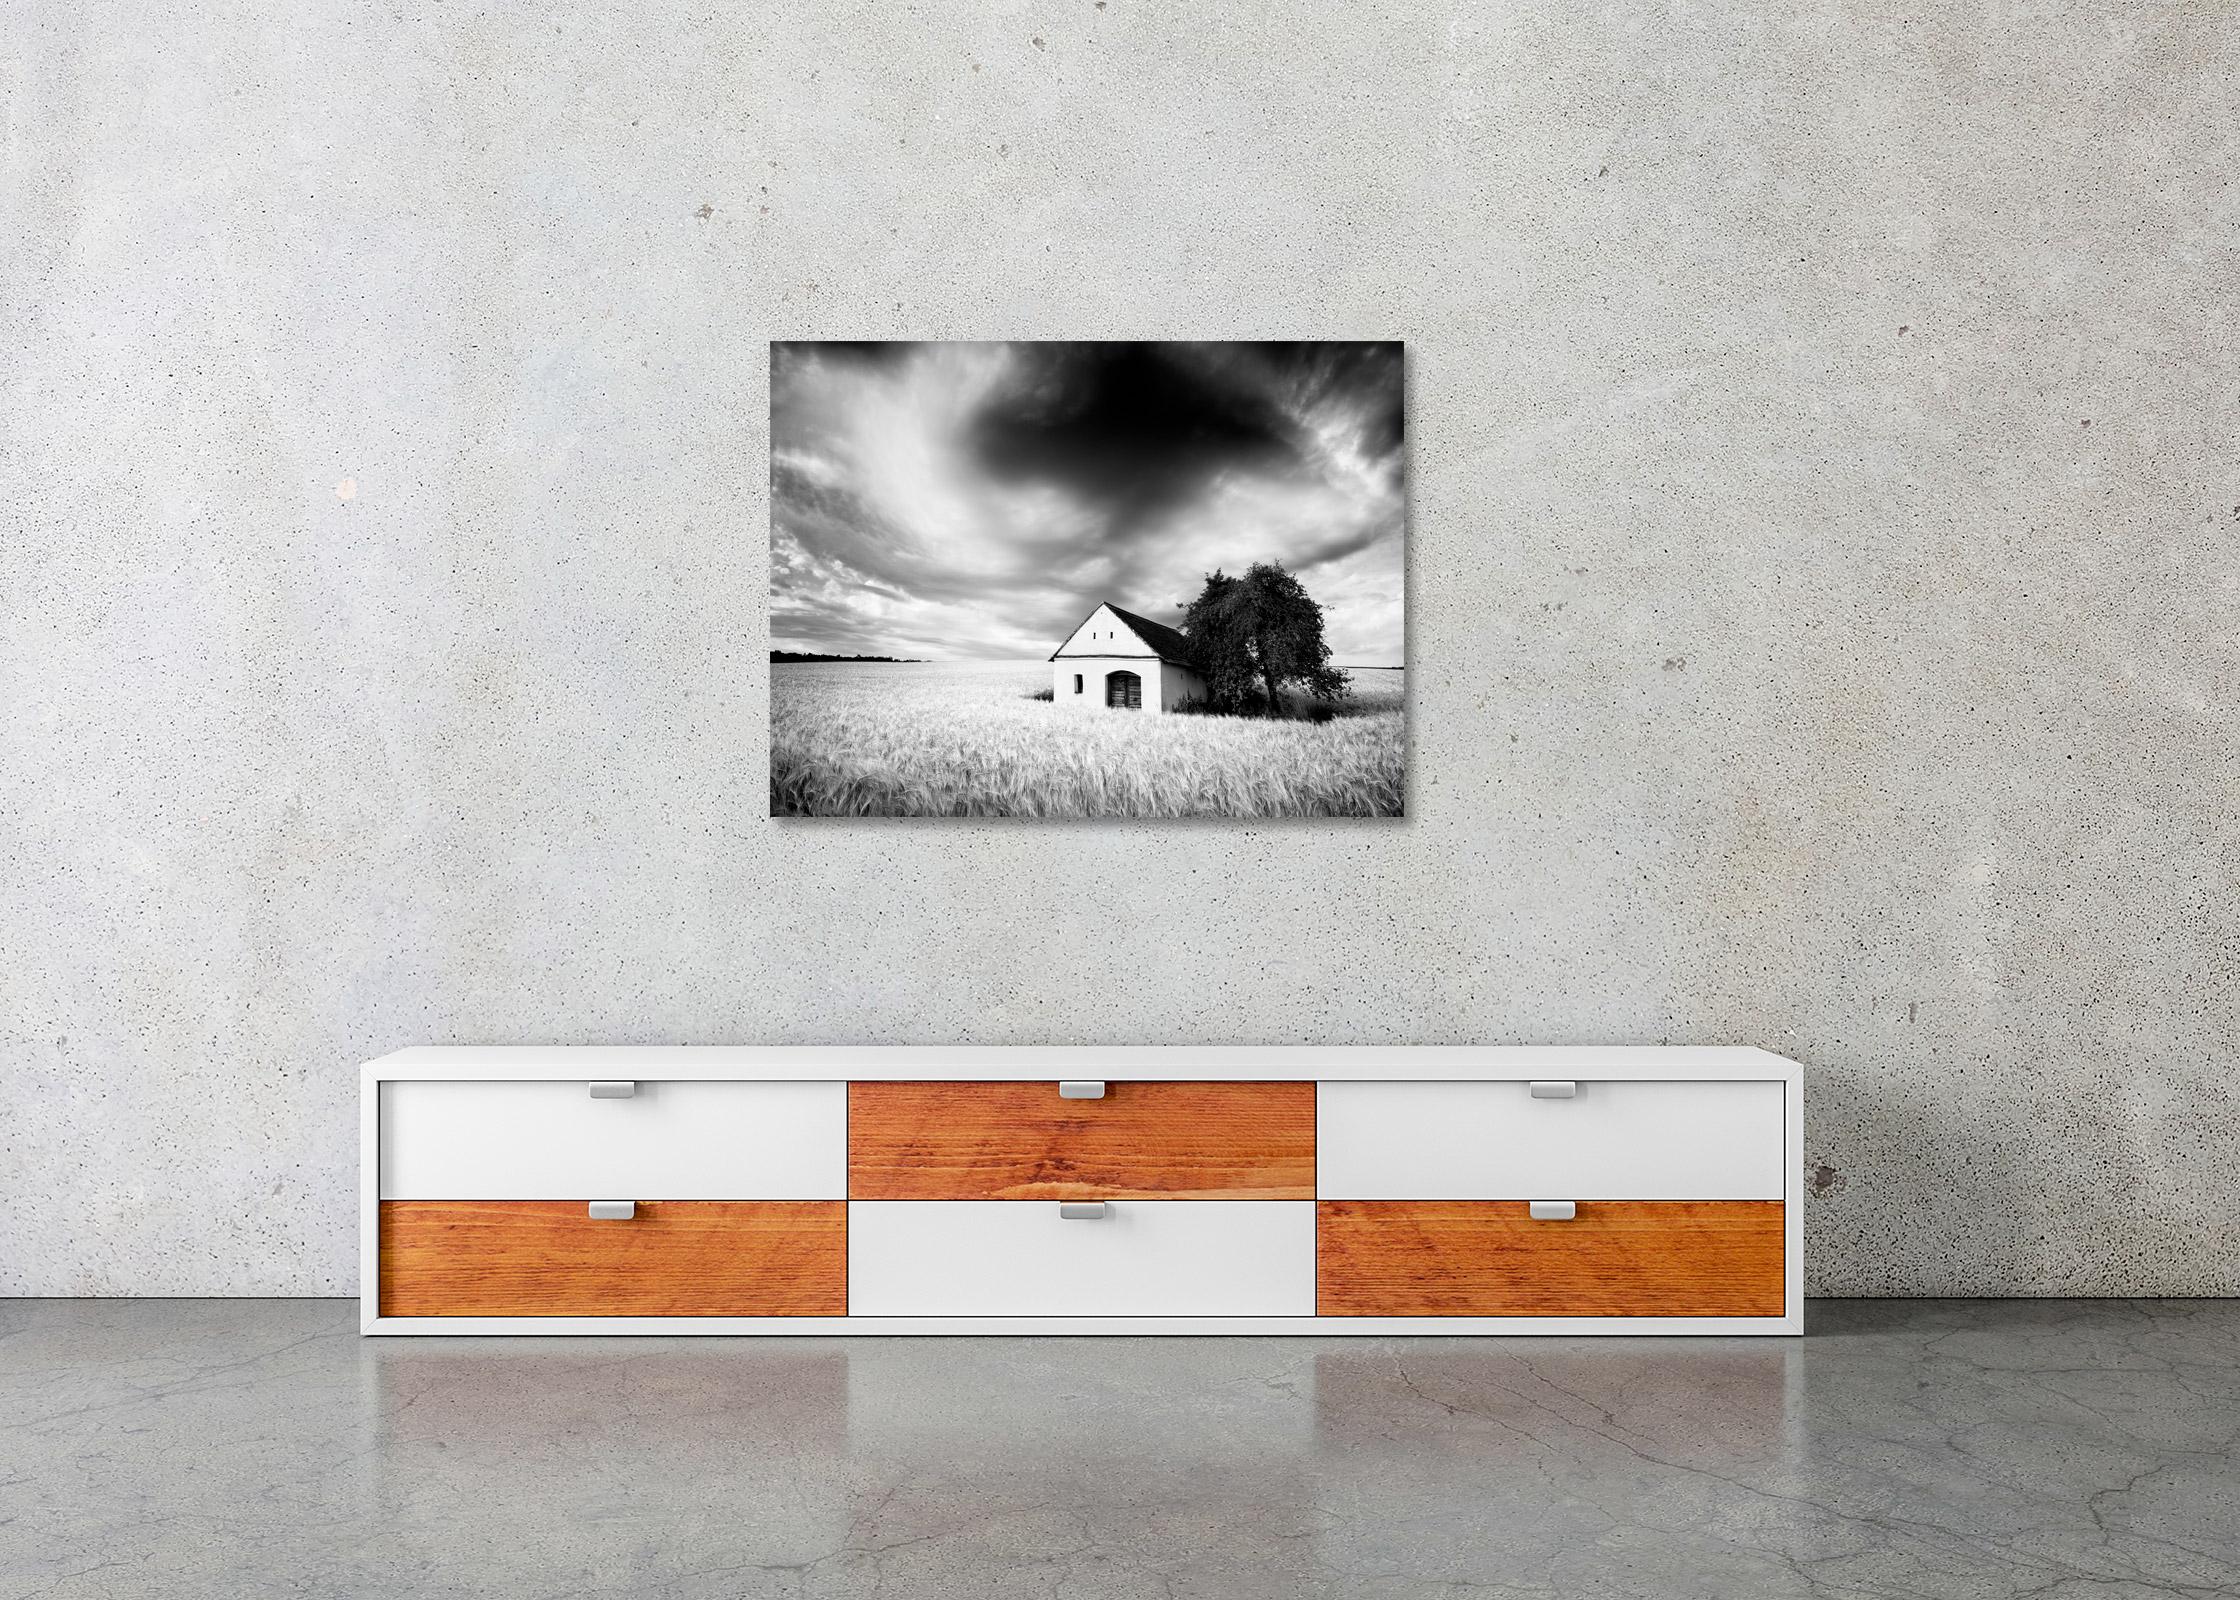 Black and white fine art landscape photography. Wine press house in wheat field, heavy clouds, storm, Austria. Archival pigment ink print, edition of 7. Signed, titled, dated and numbered by artist. Certificate of authenticity included. Printed with